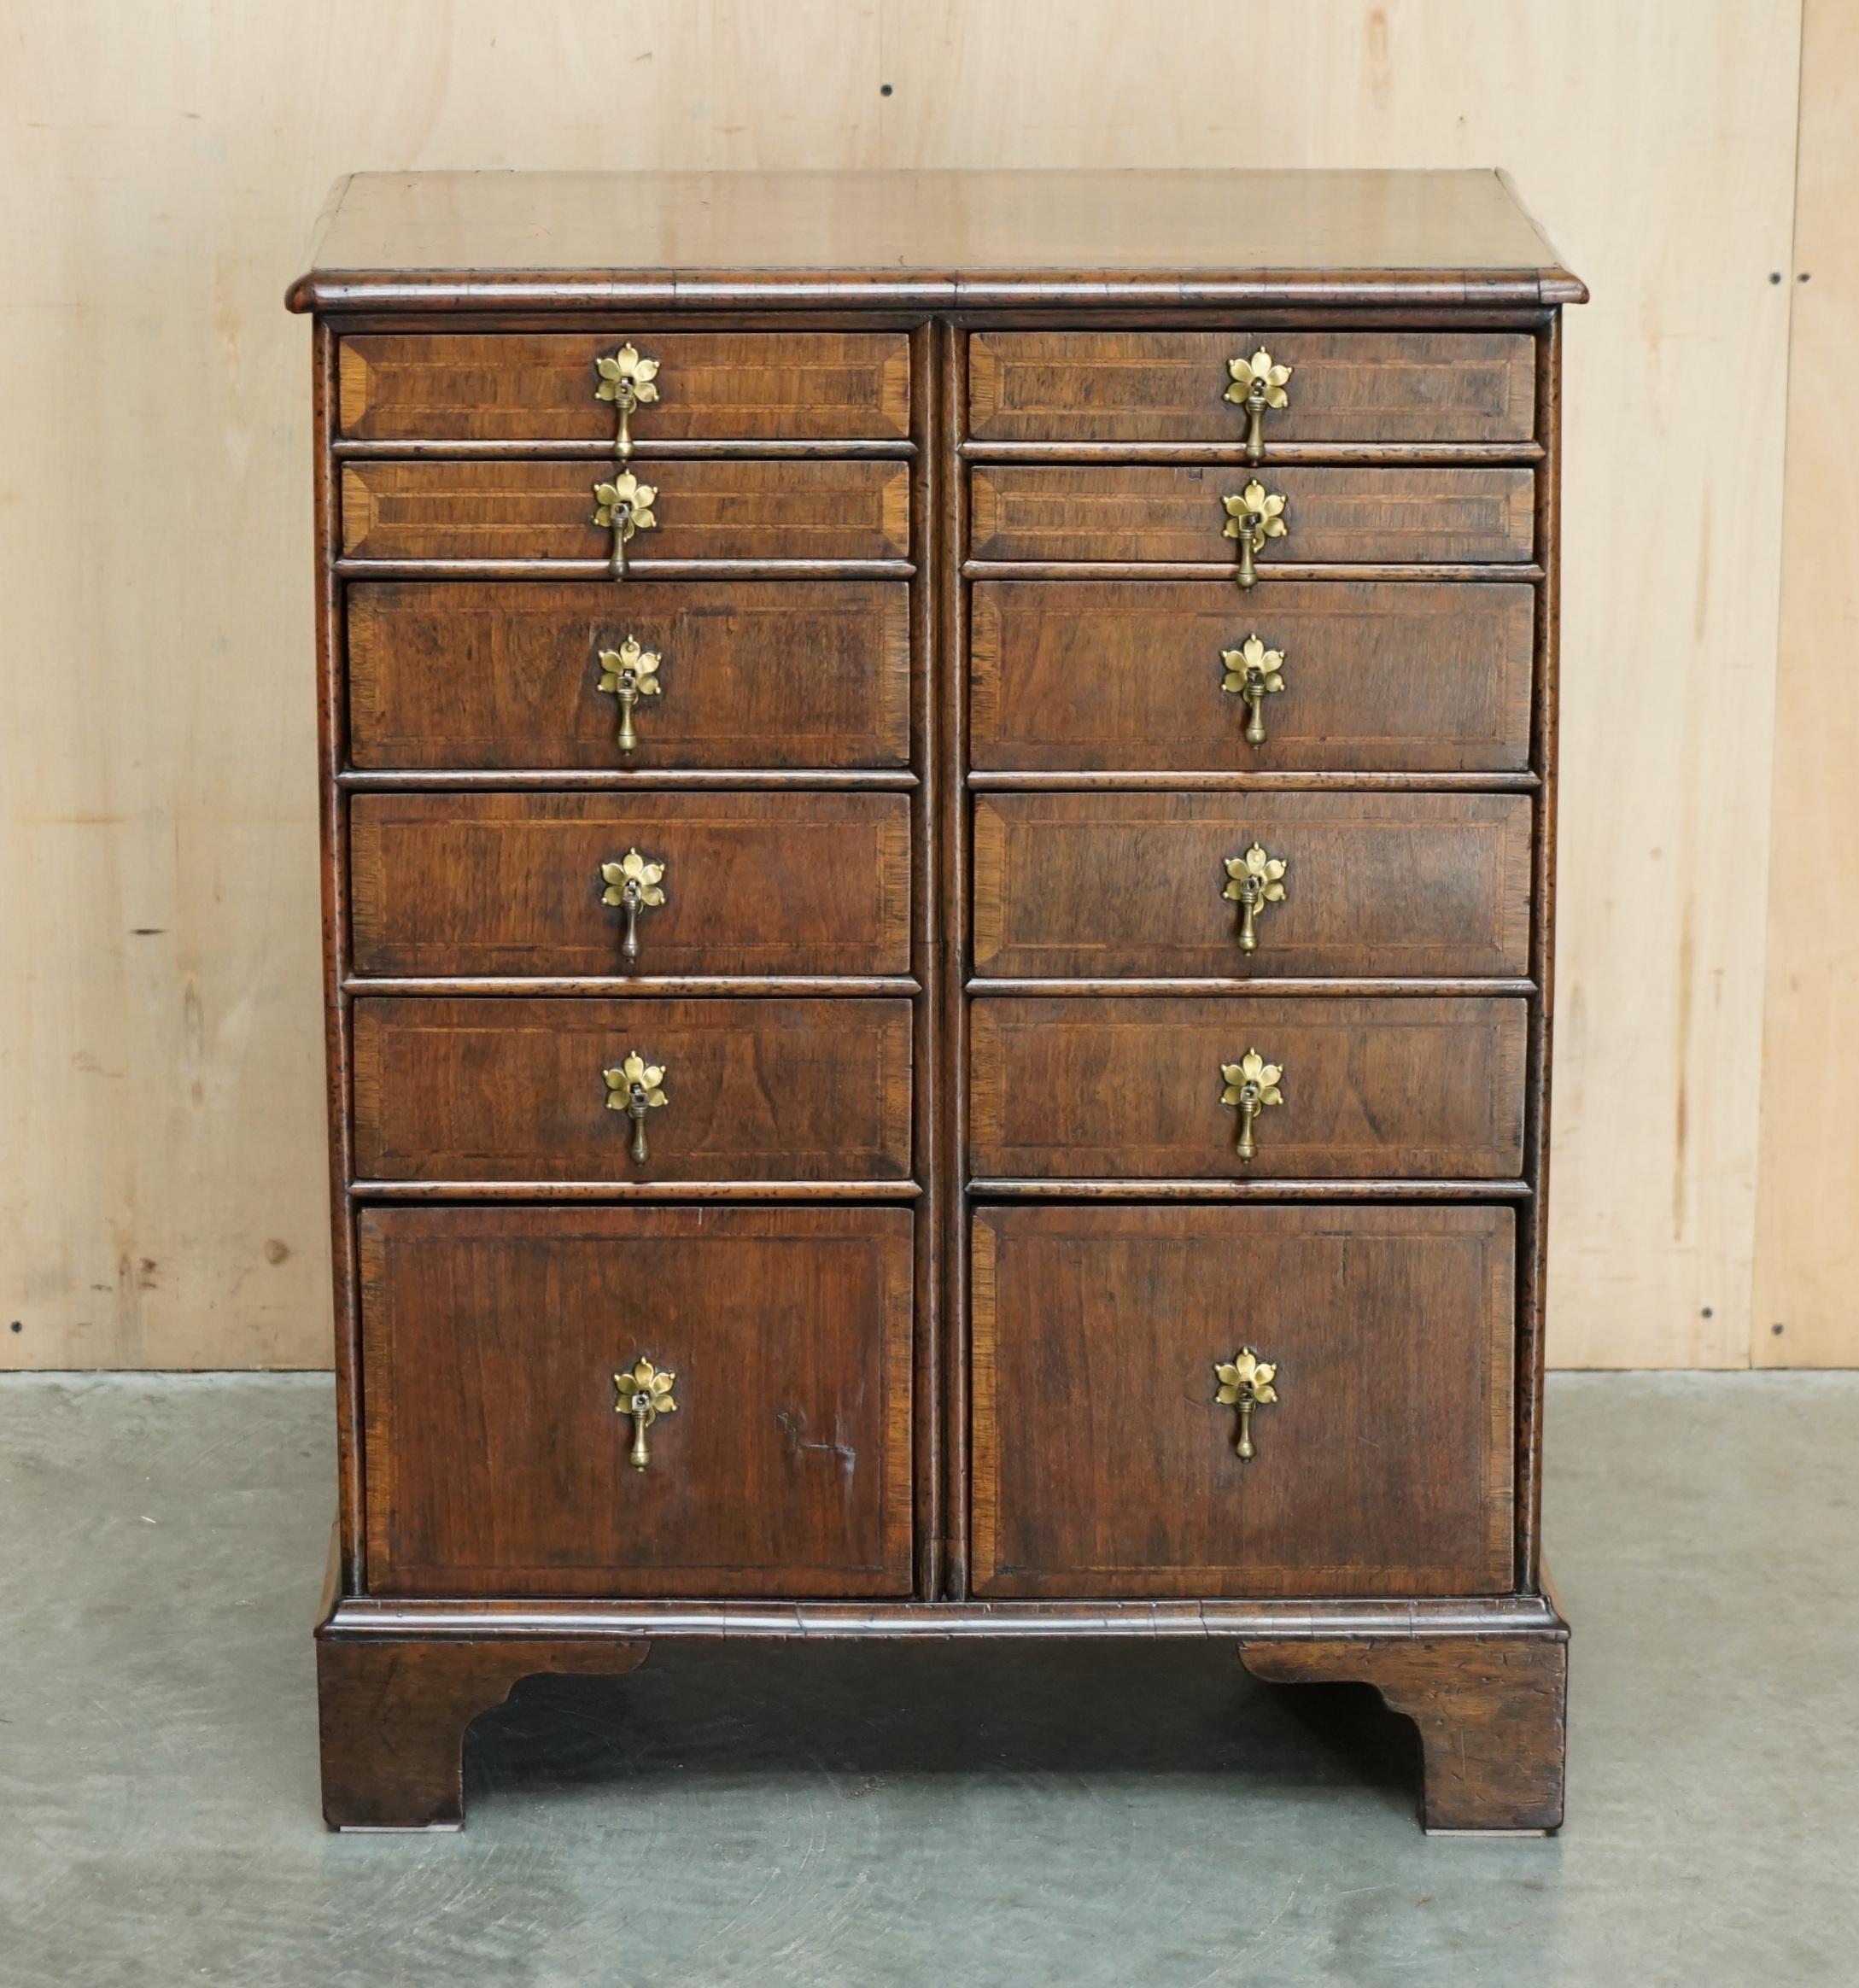 George III EXQUISITE ANTIQUE CIRCA 1760 BURR WALNUT GEORGE III BANK / CHEST OF DRAWERs For Sale